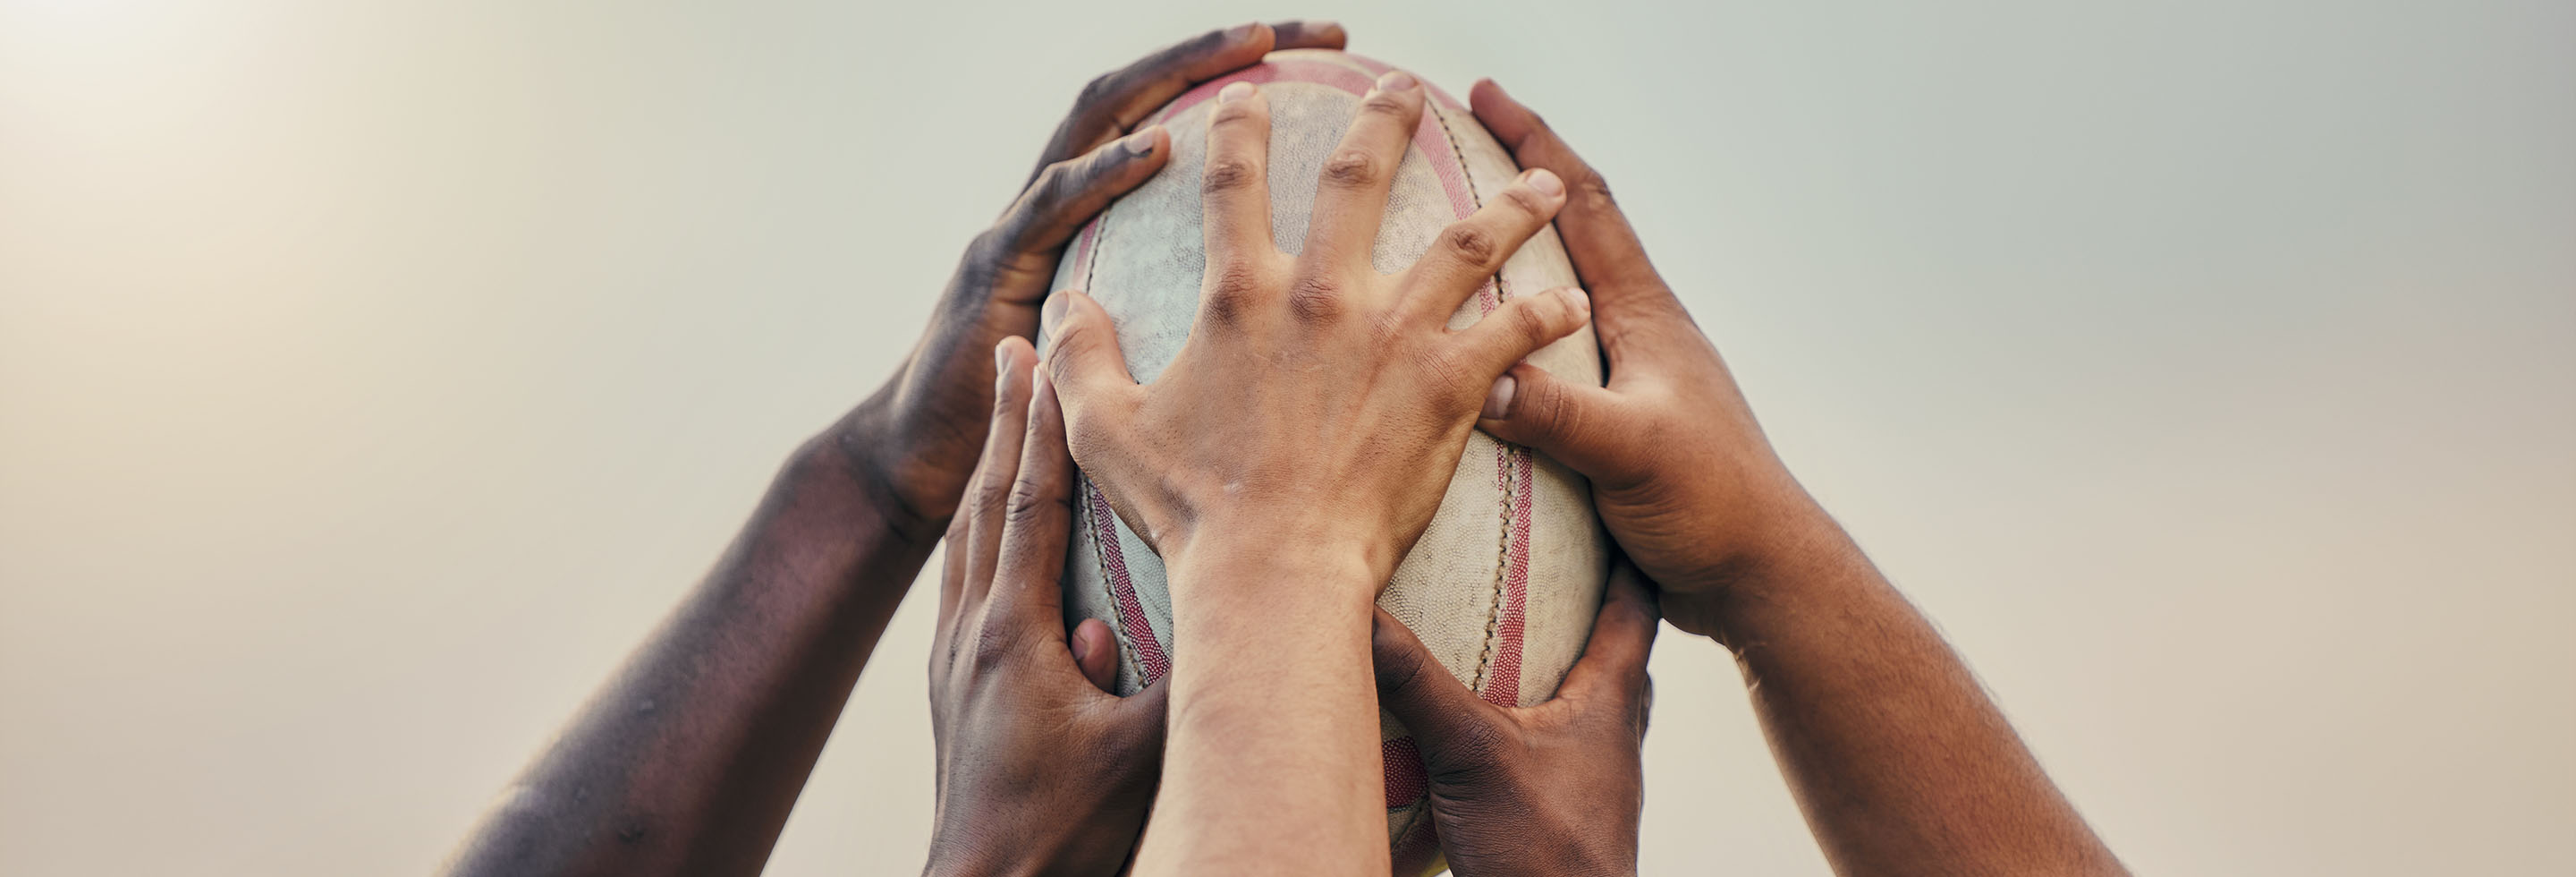 Hands grabbing rugby ball